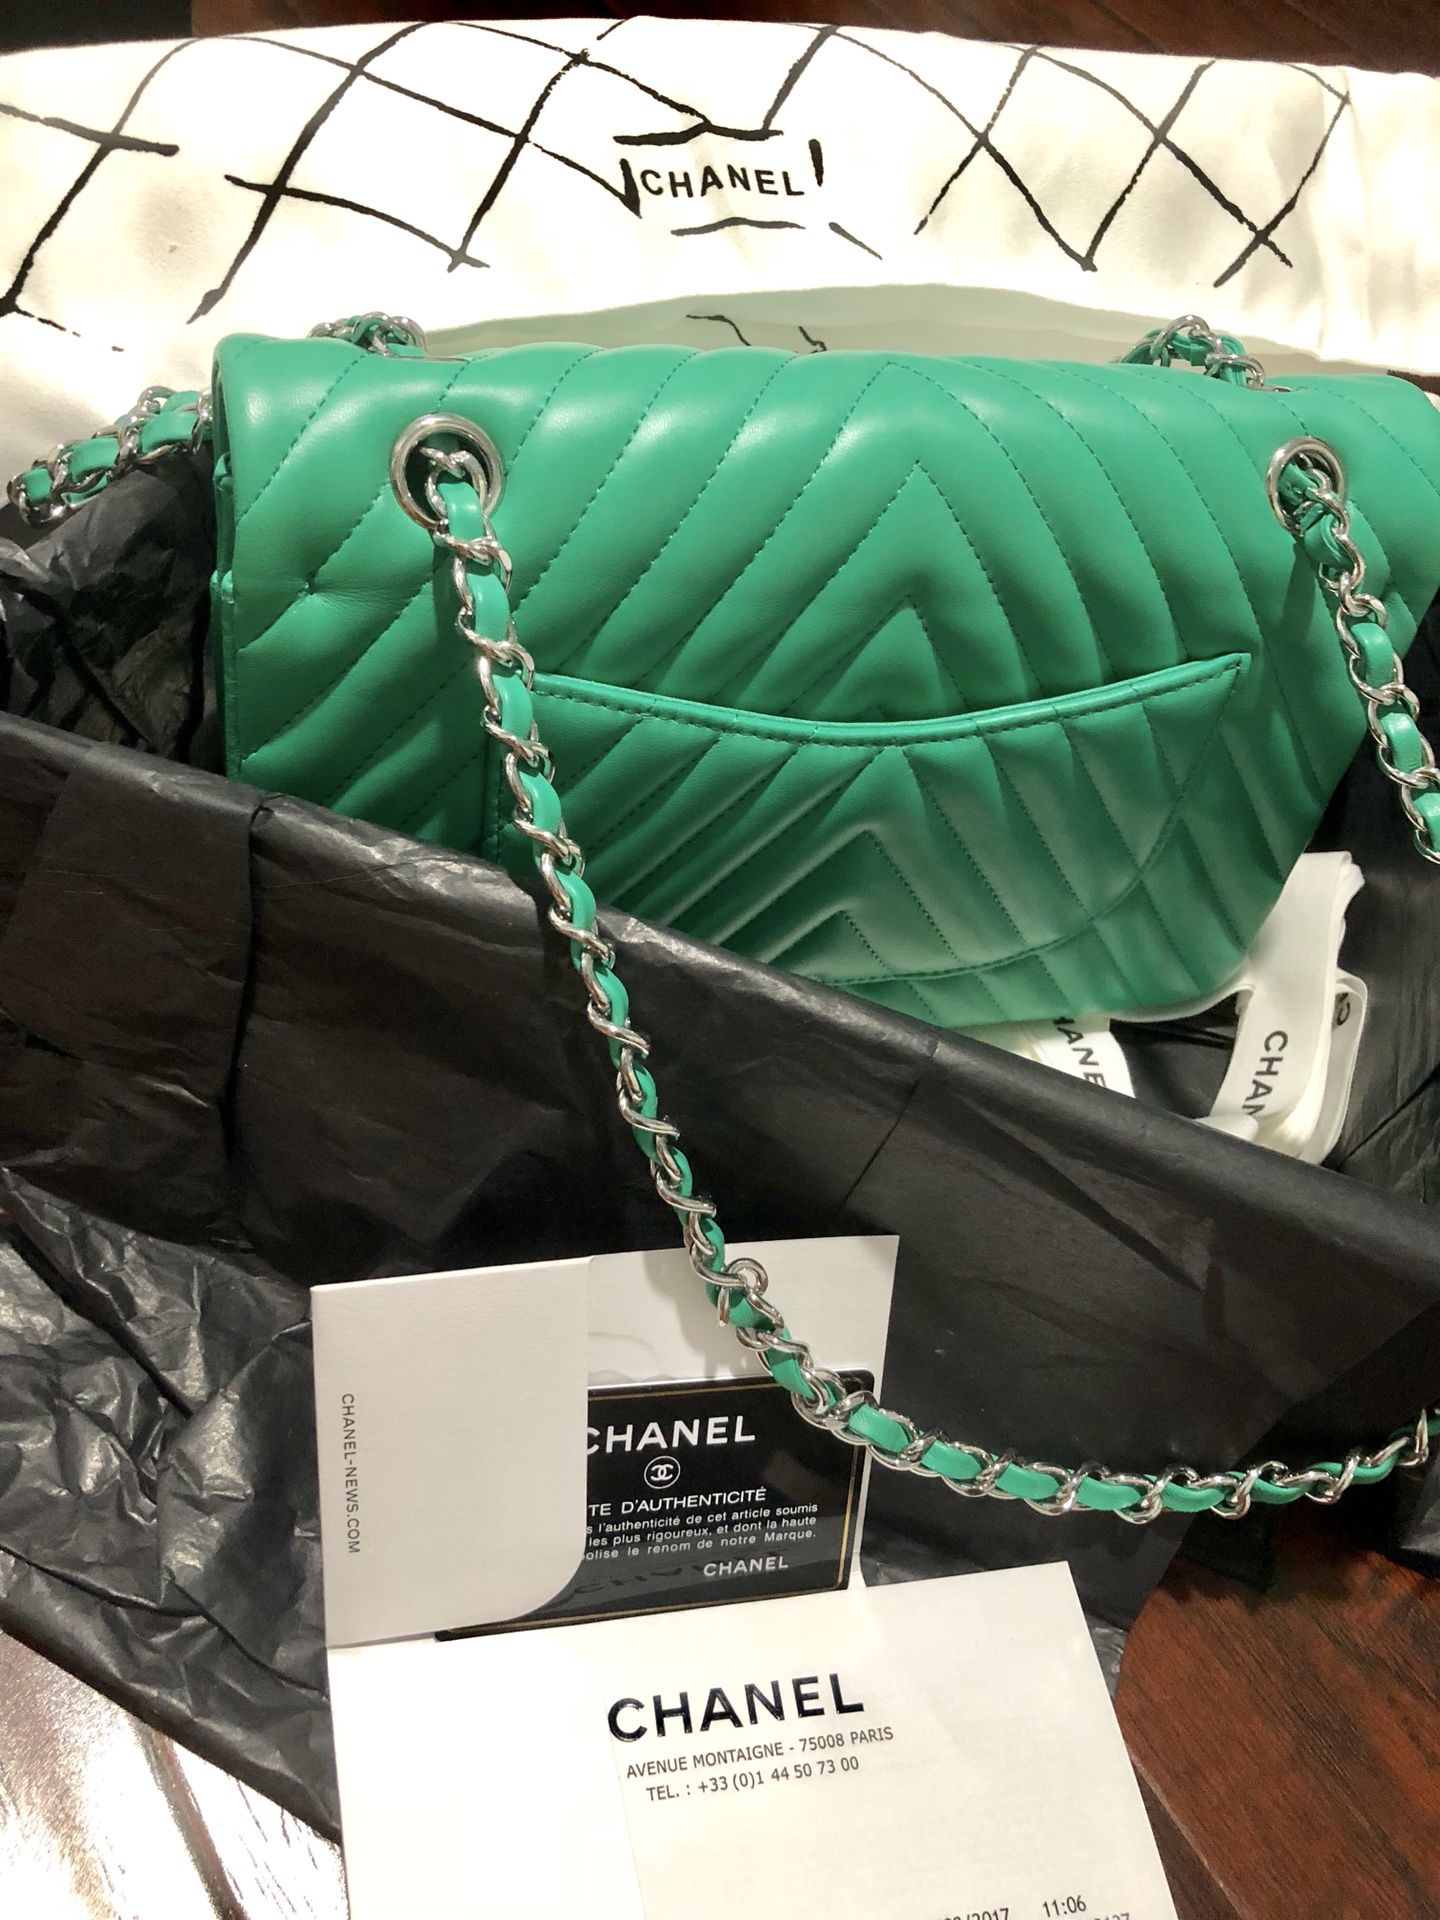 Chanel classic medium teal green bag purse for Sale in Milpitas, CA -  OfferUp